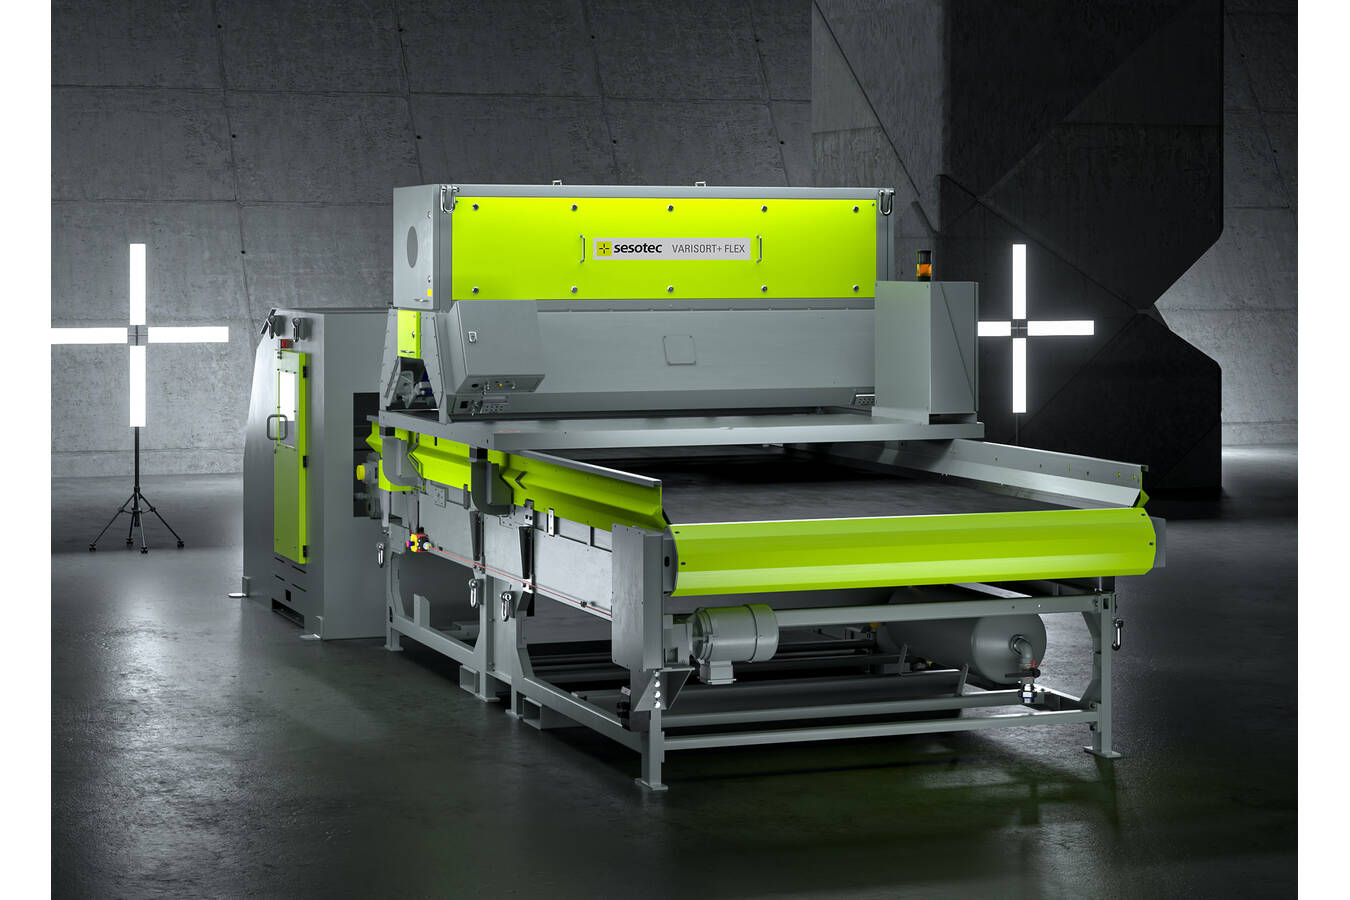 At IFAT 2022, Hall B5, Stand 415/514, Sesotec presents the new VARISORT+ FLEX sorting module for the first time (Photo: Sesotec GmbH)